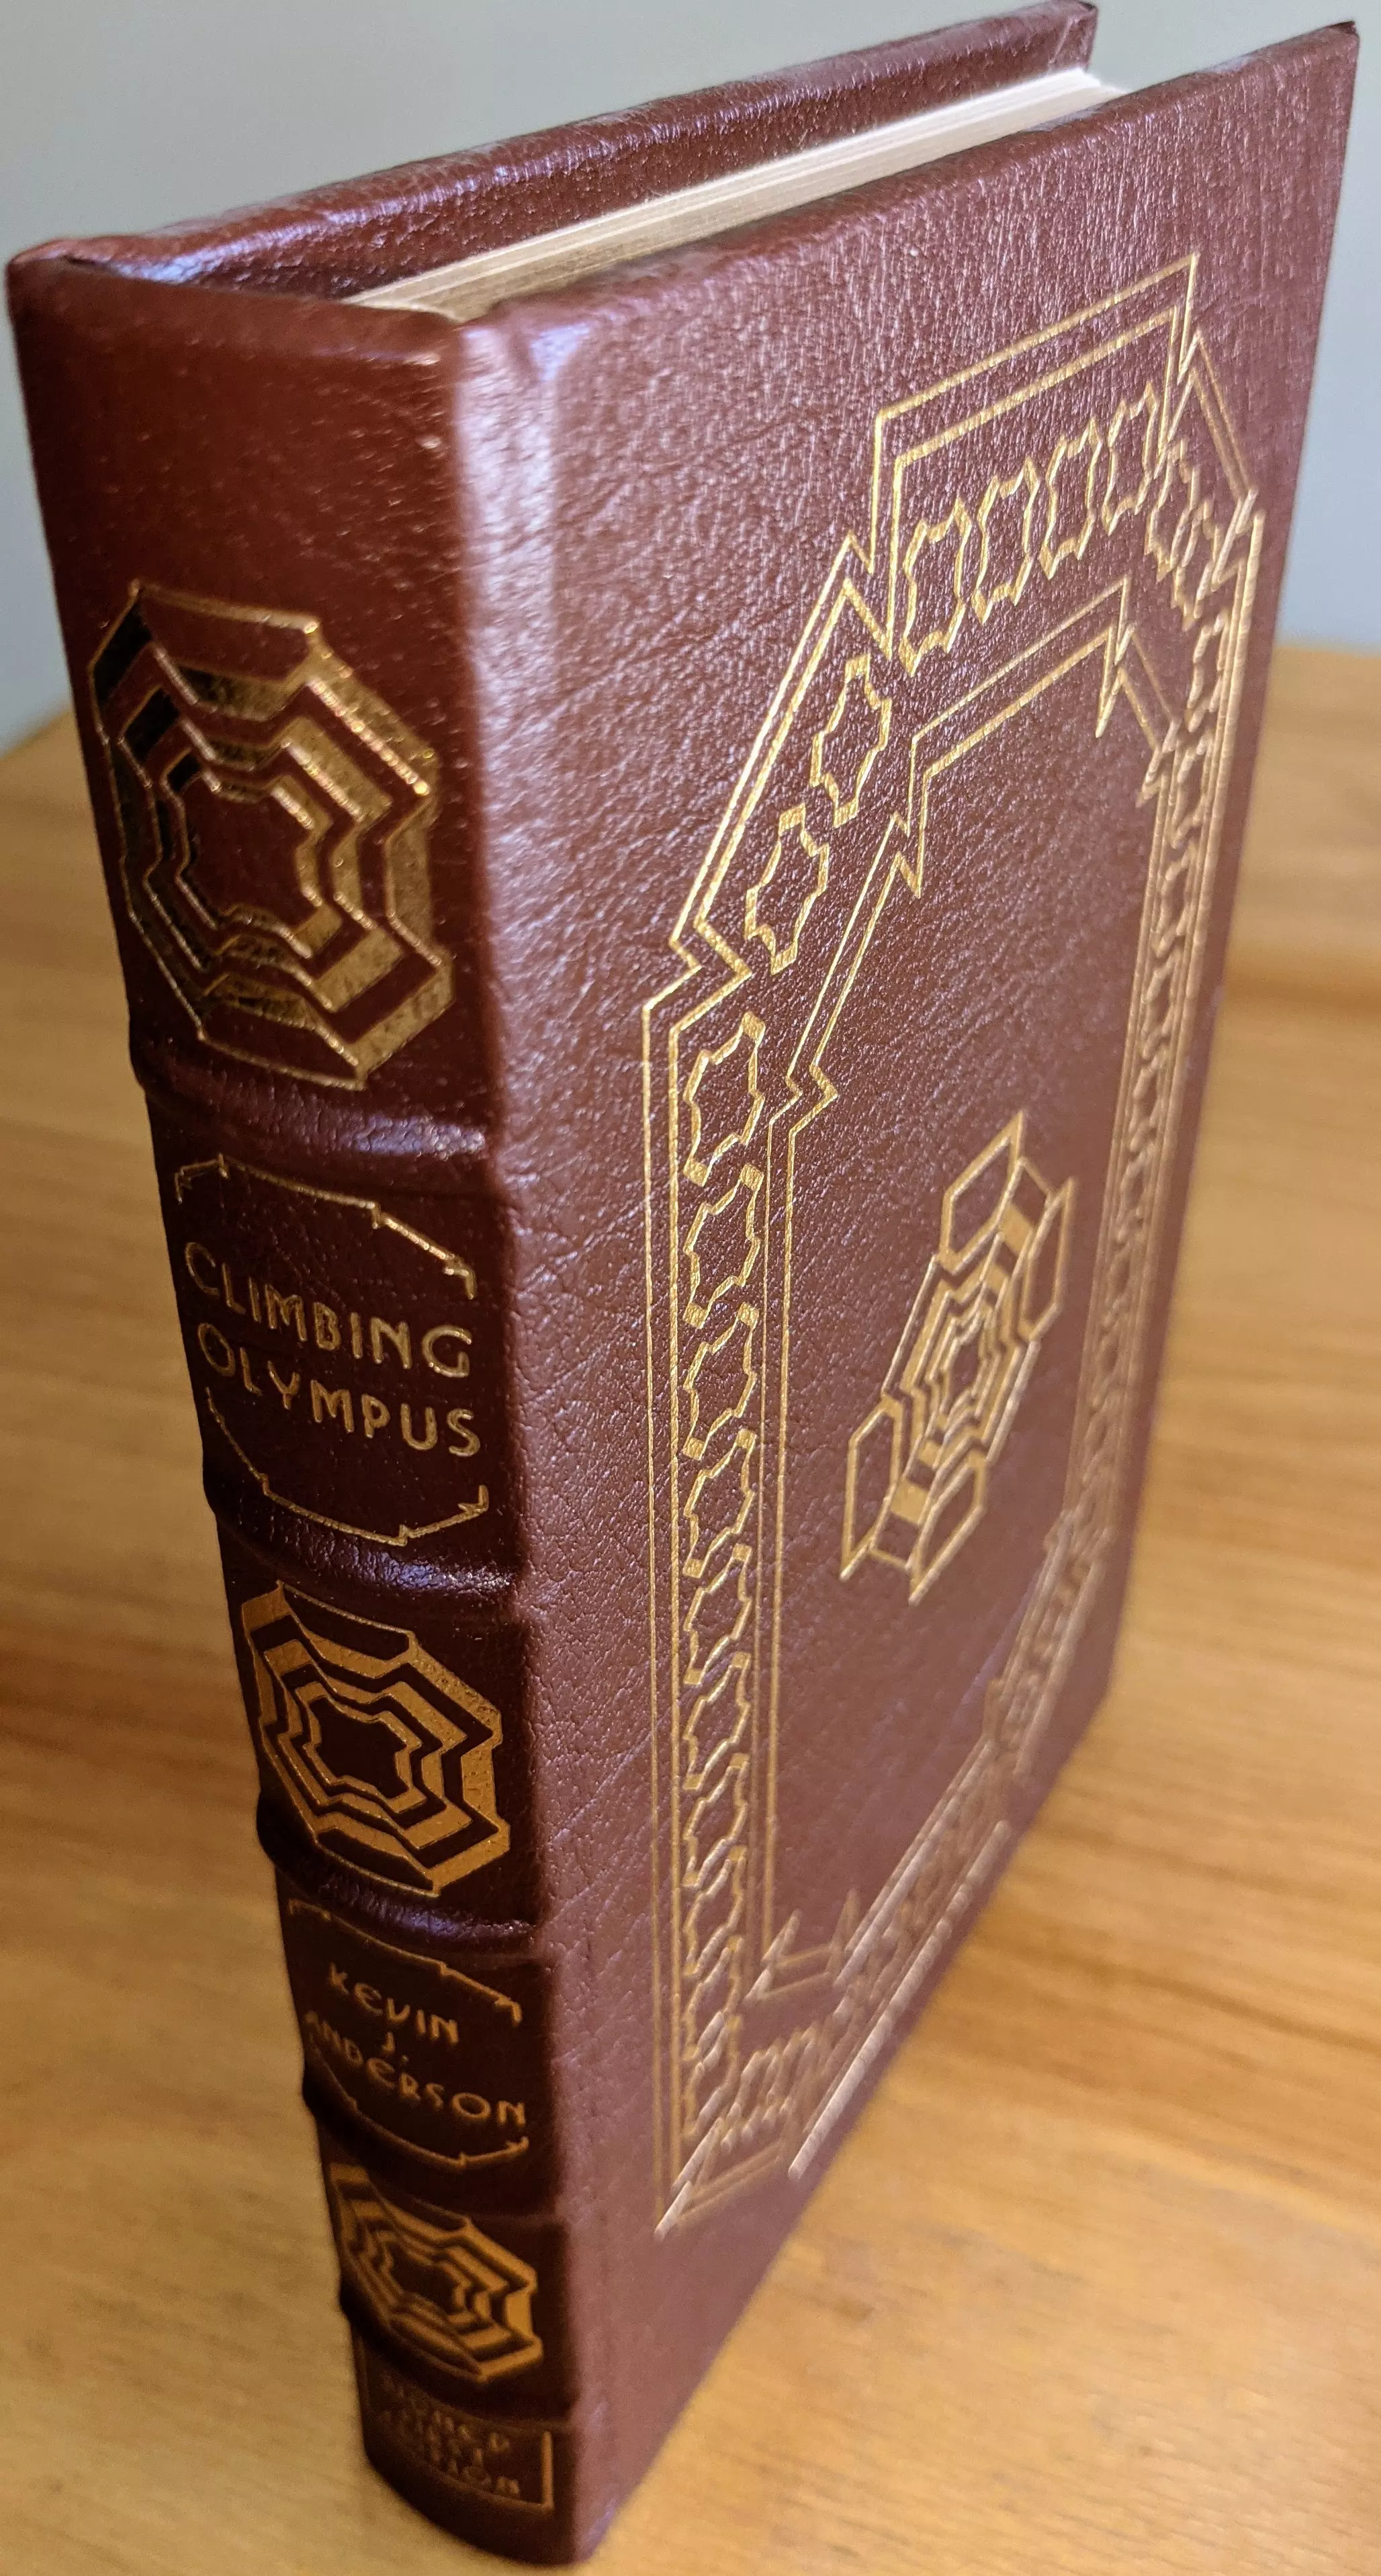 Stunning Brown Leather Bound hardback book with hubbed spine, cover artwork in 22kt gold, printed on archival paper with gold gilded edges, smyth sewing & concealed muslin joints
	  - original artwork by Jeff Fisher